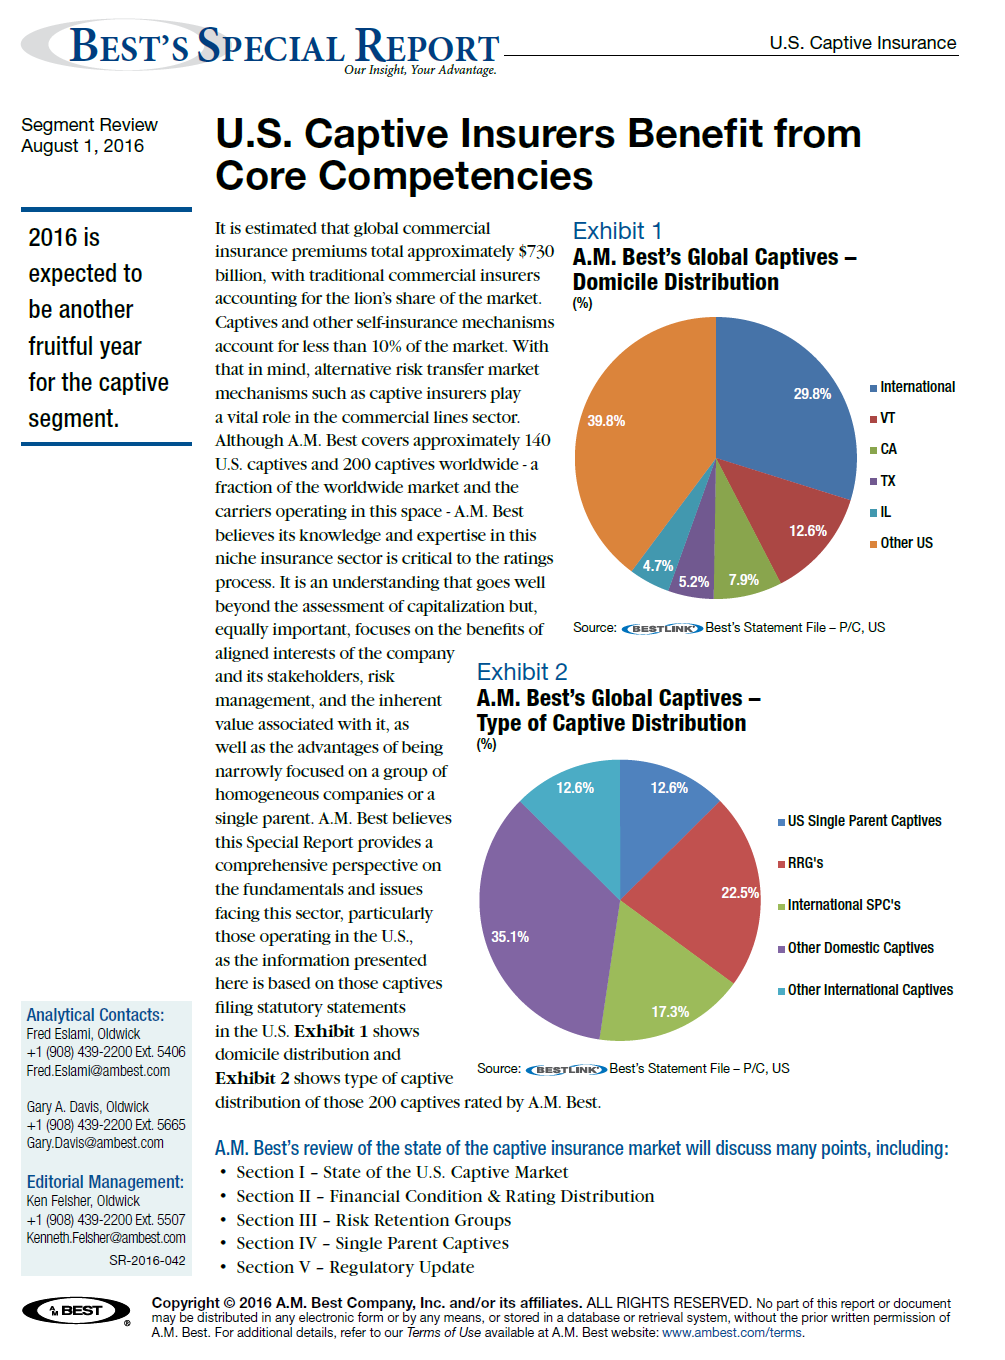 US Captive Insurers Benefit from core competencies 1.PNG